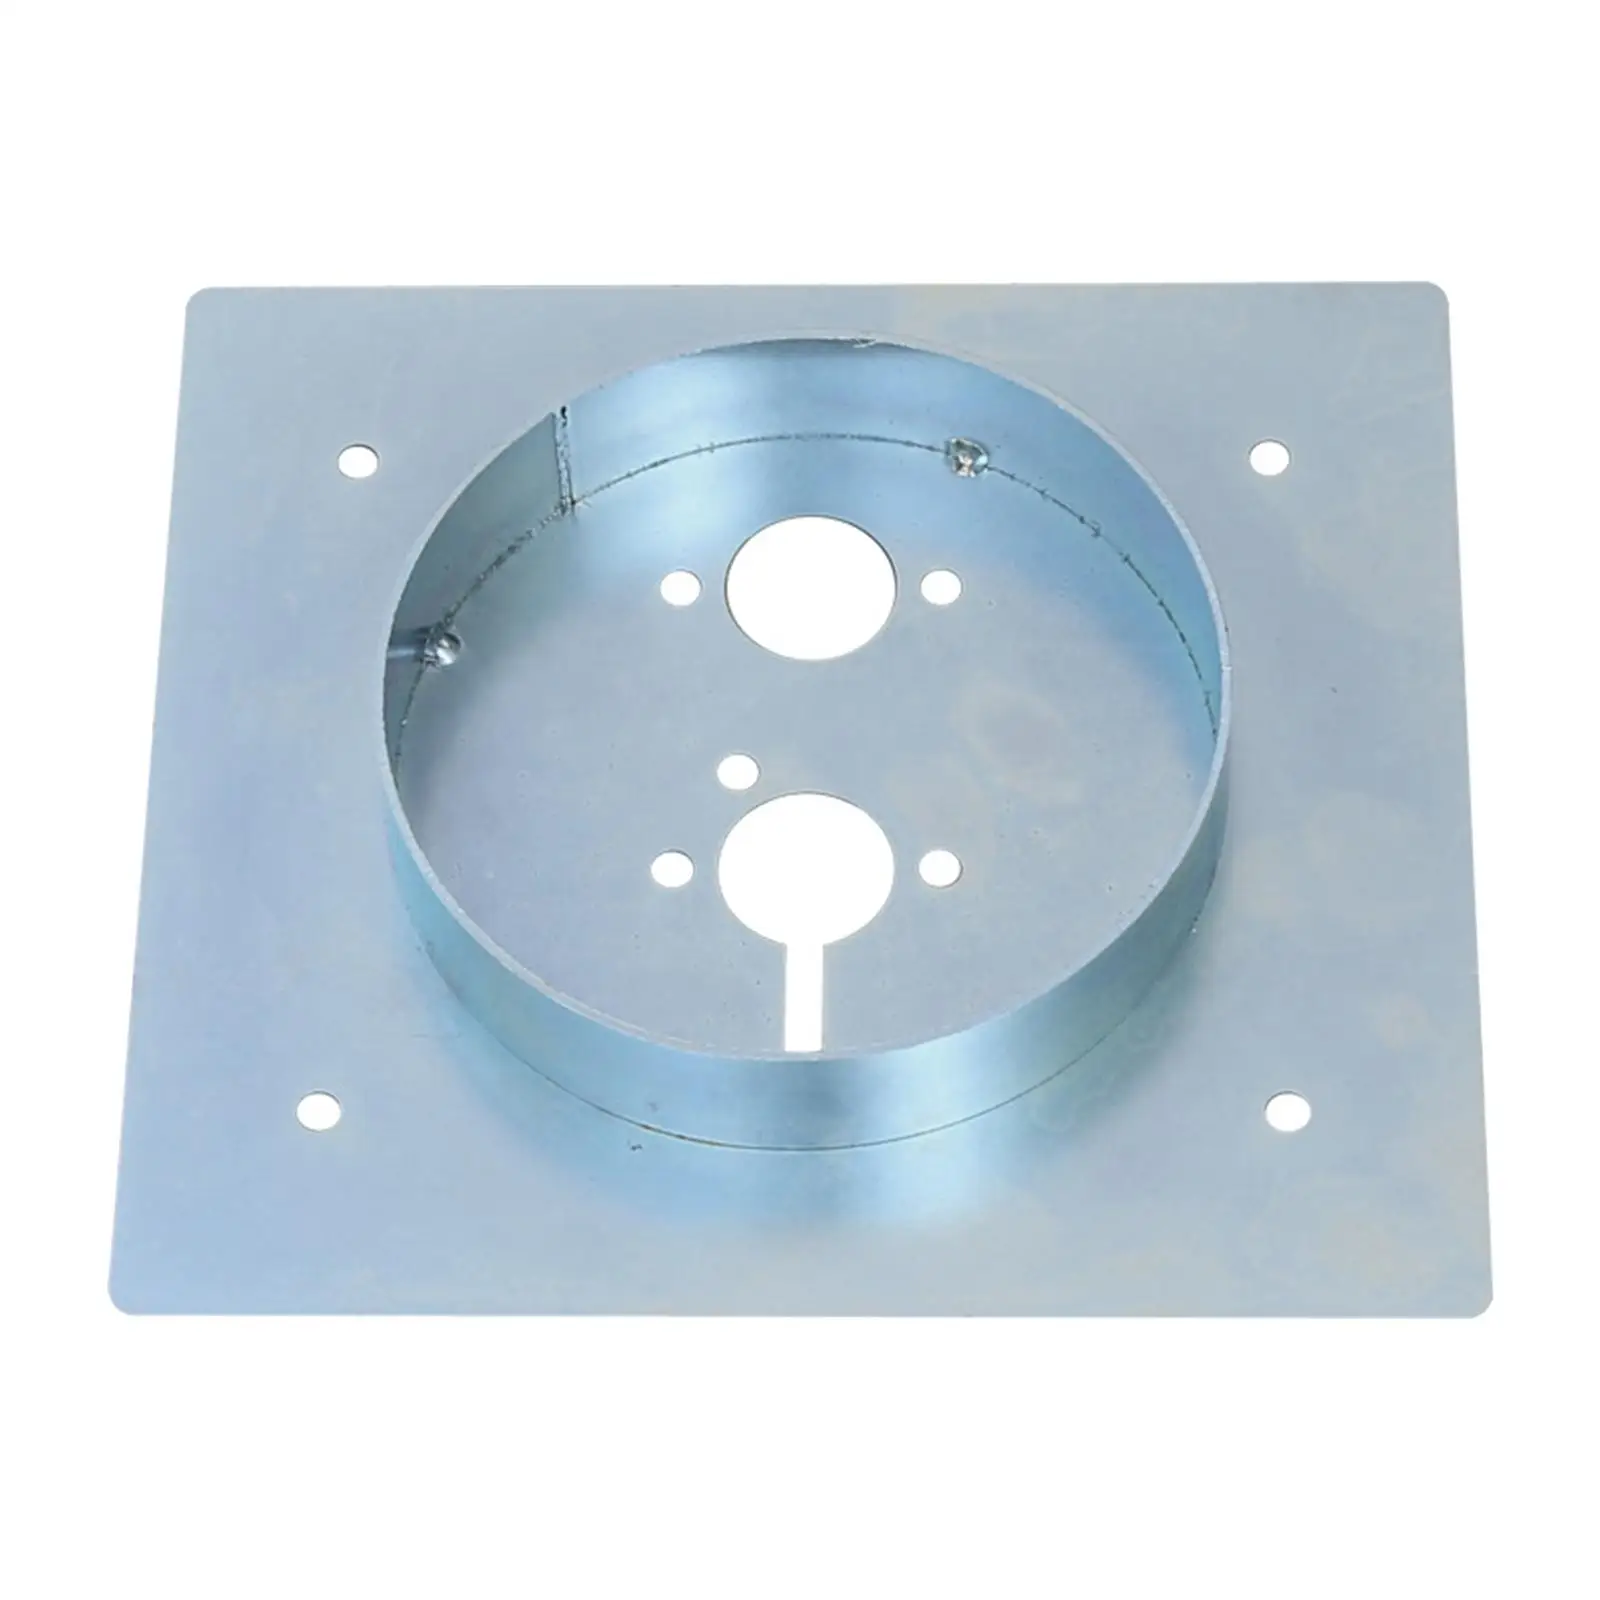 Diesel Heater Mounting Plate Durable Spare Parts High Performance Premium